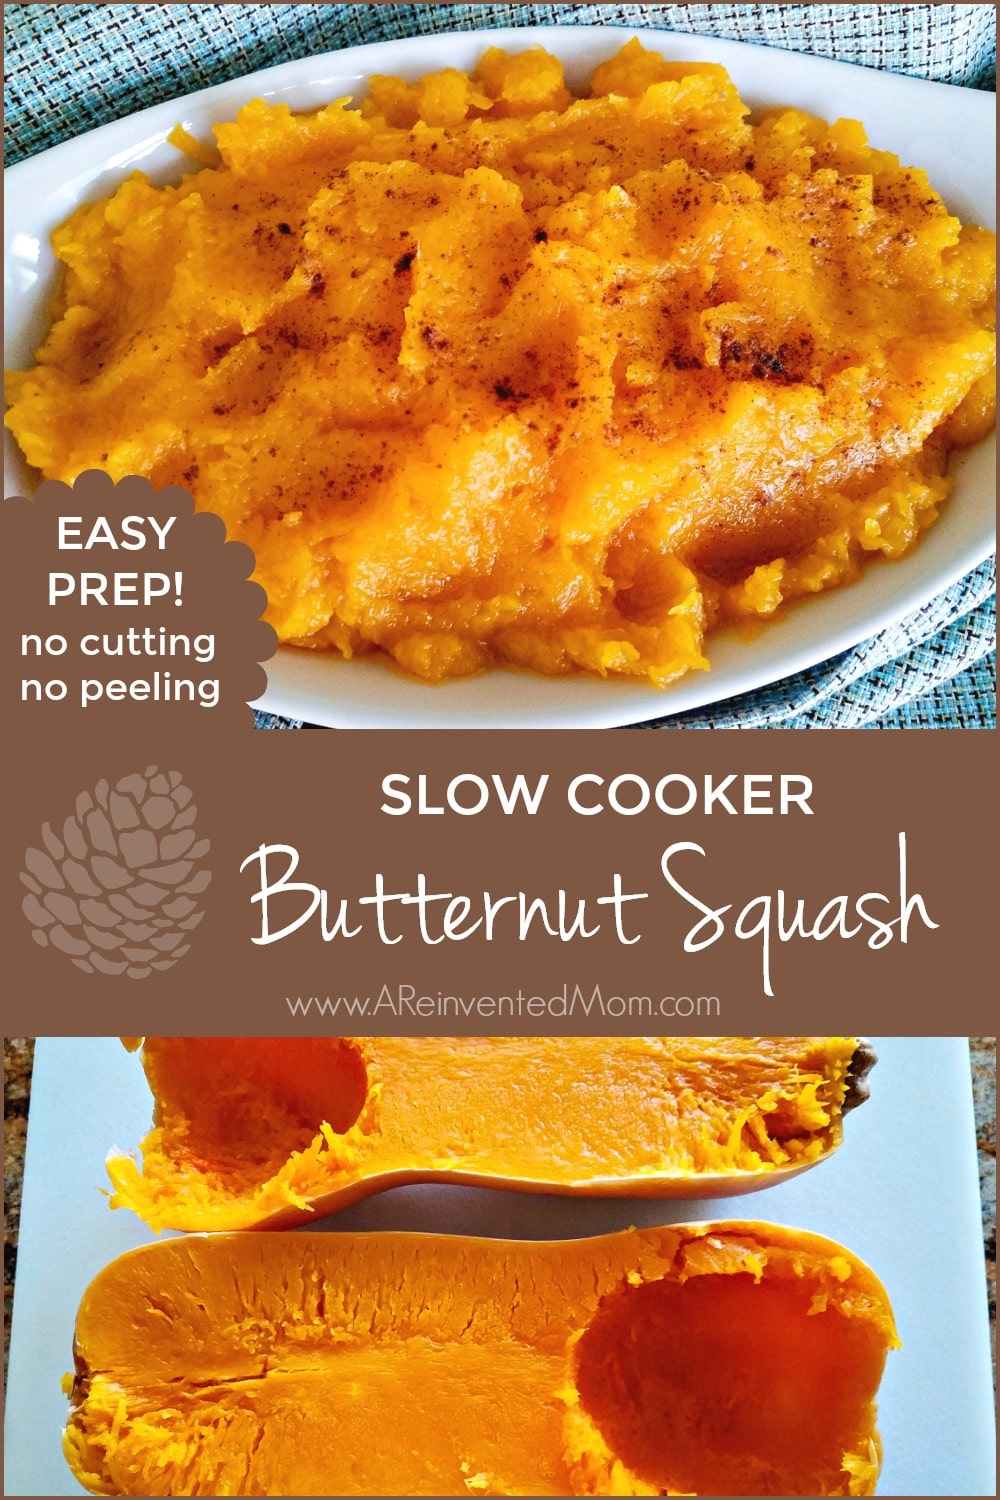 How To Prepare Whole Butternut Squash in the Slow Cooker Pin #2 | A Reinvented Mom